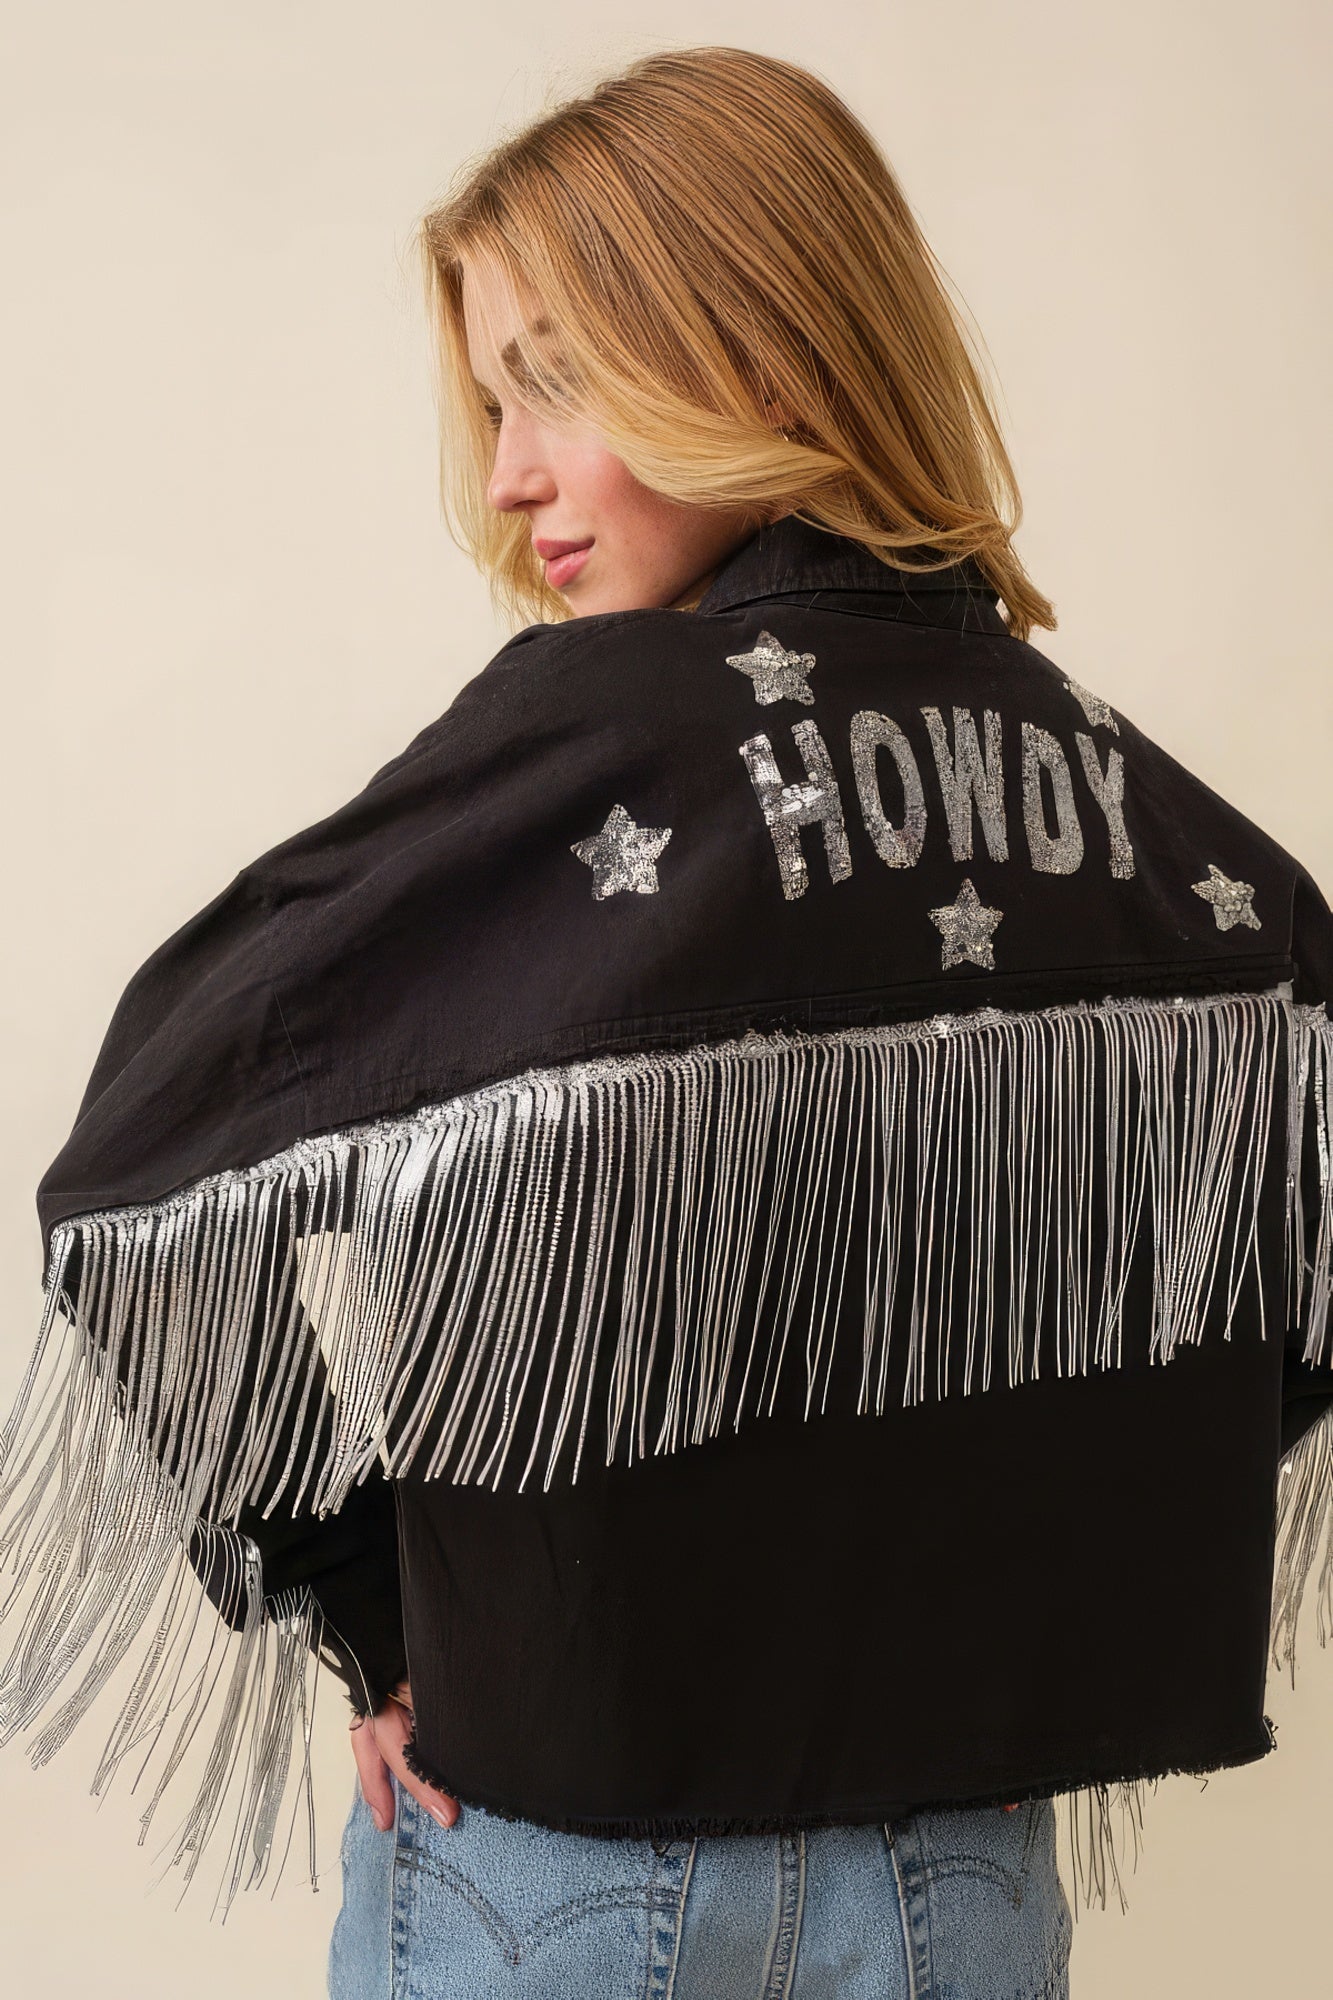 Howdy Sequin Fringe And Star Patches Jacket - Tigbuls Variety Fashion